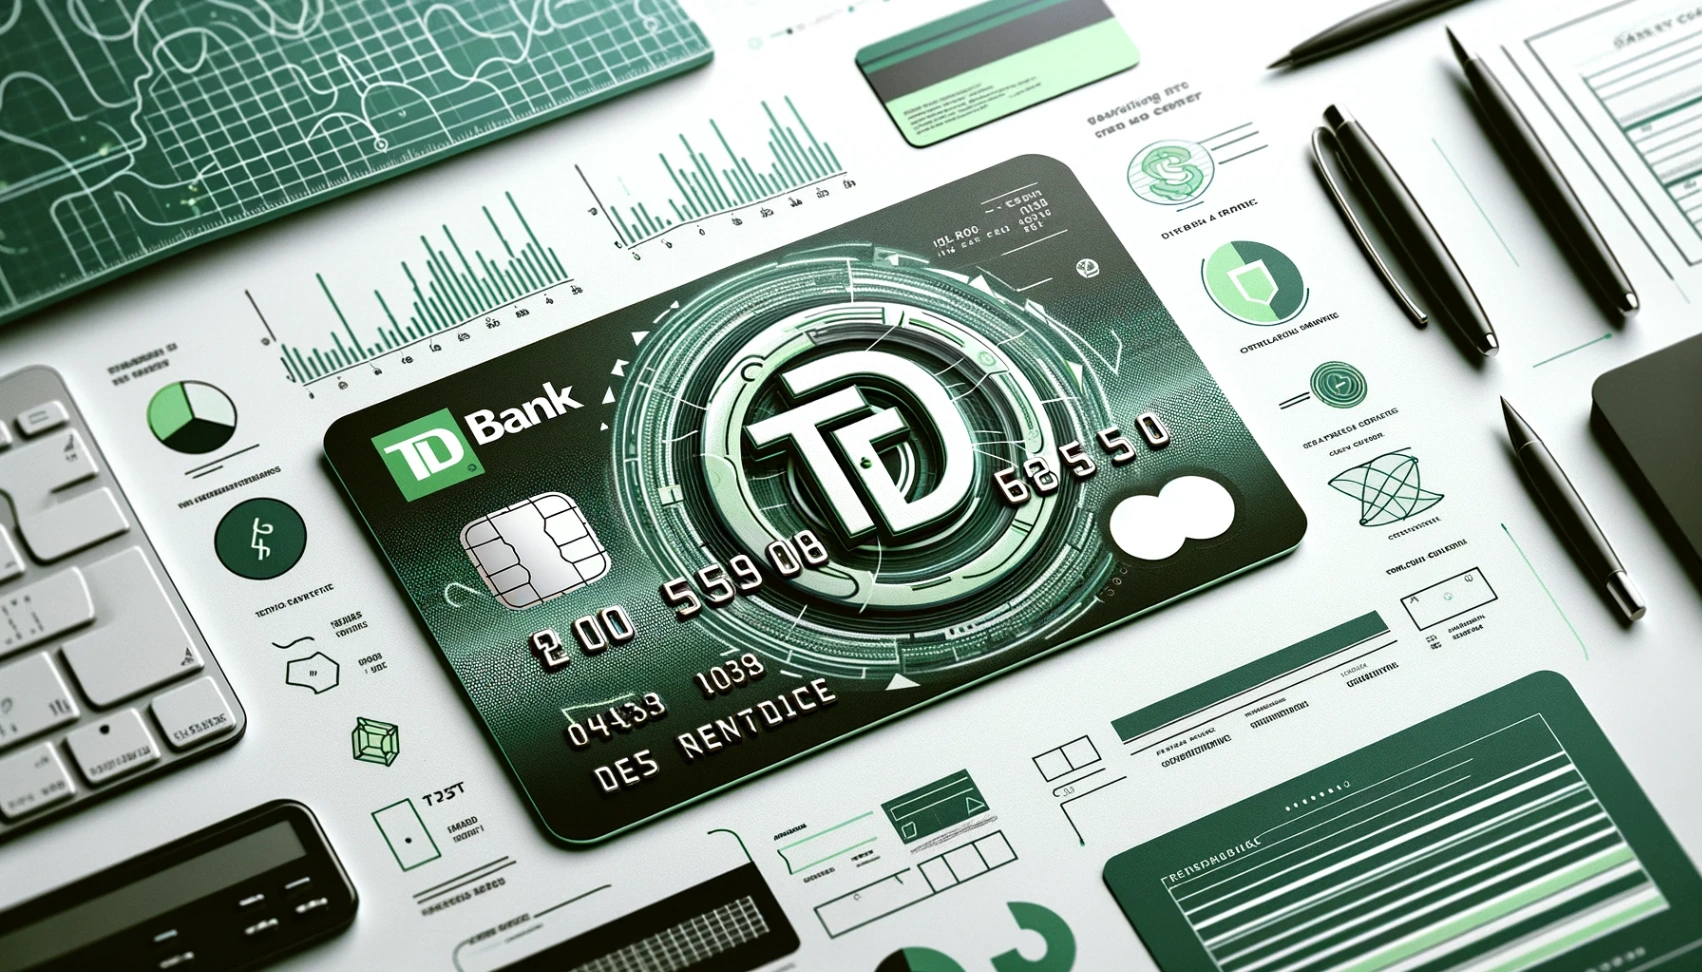 TD Bank Credit Card - Learn How to Apply Online